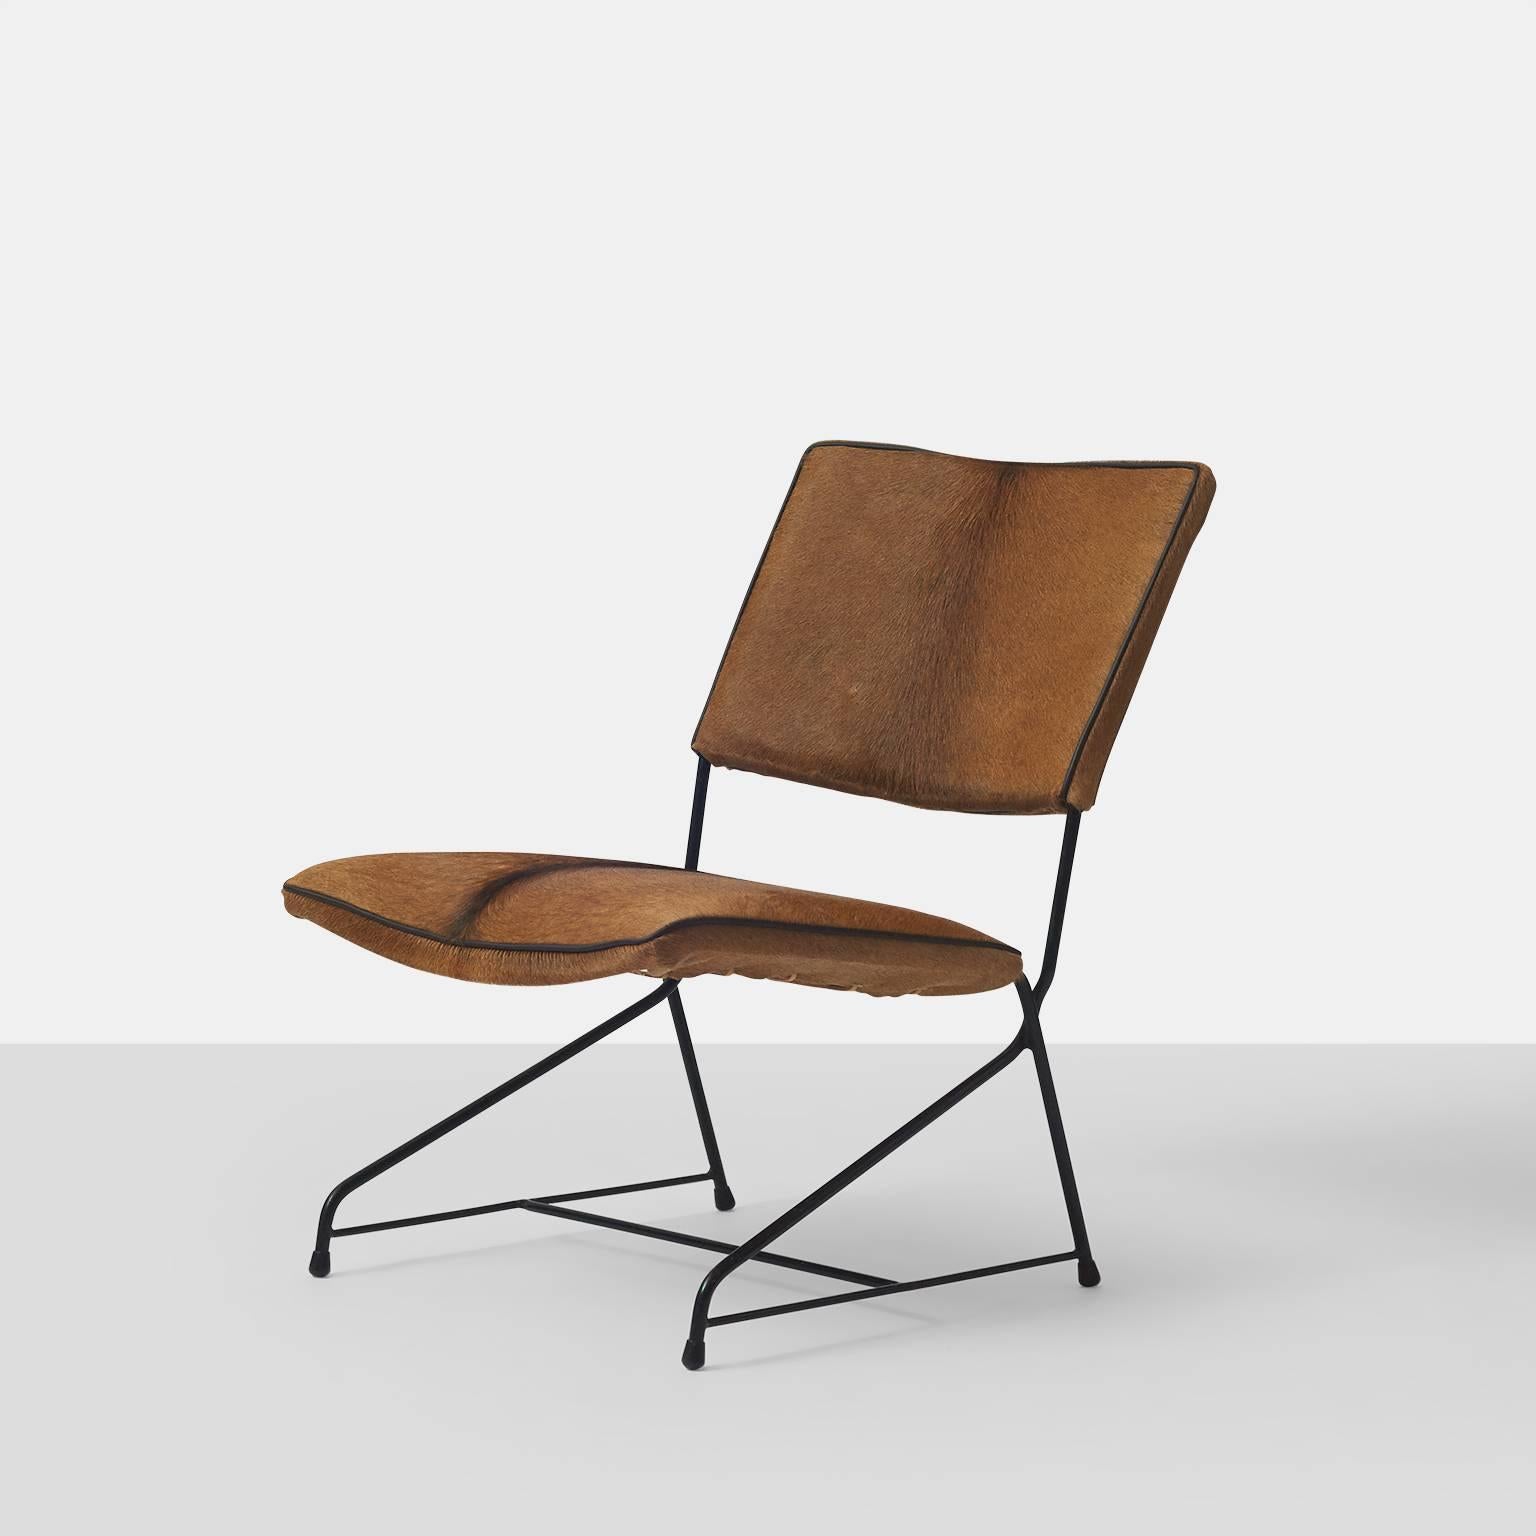 A lounge chair with an iron frame and cantilevered seat restored in a hair on hide with leather trim. Made in Italy in the 1950s. The frame is reminiscent of versions made by Arflex and Augusto Bozzi.